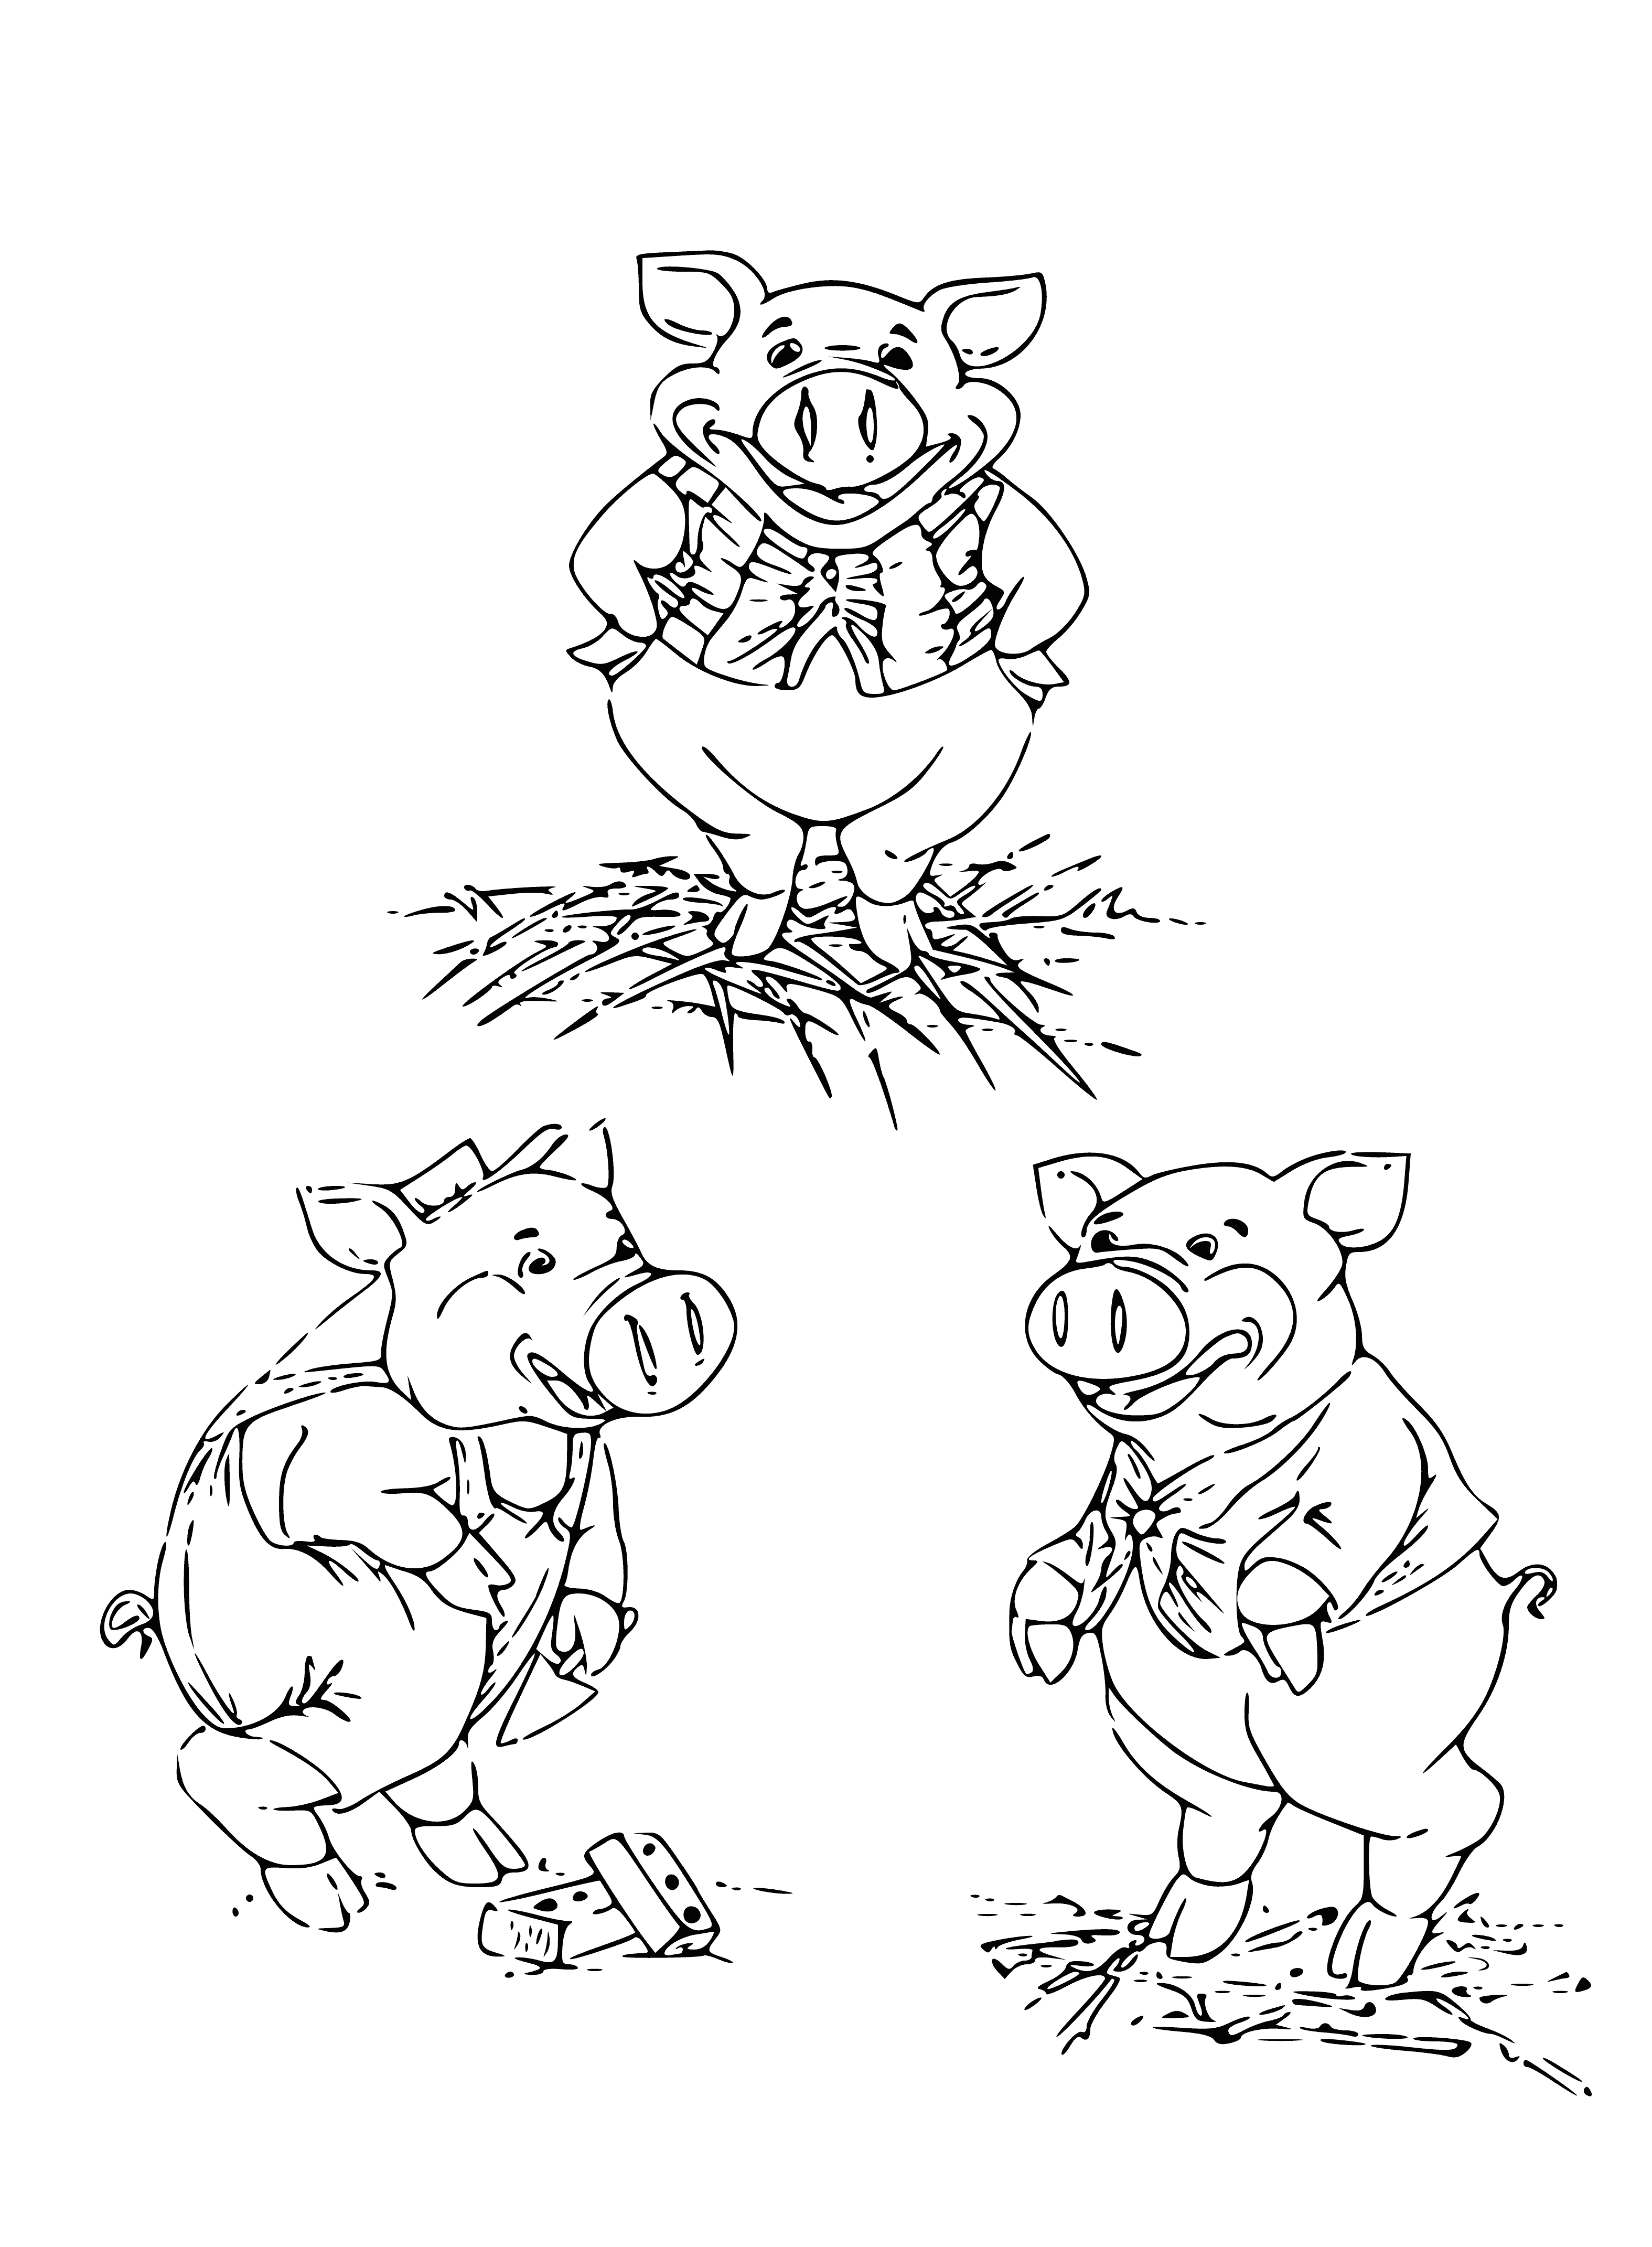 coloring page: 3 pigs: 2 standing, 1 sitting, all facing same direction, 2 behind 1.